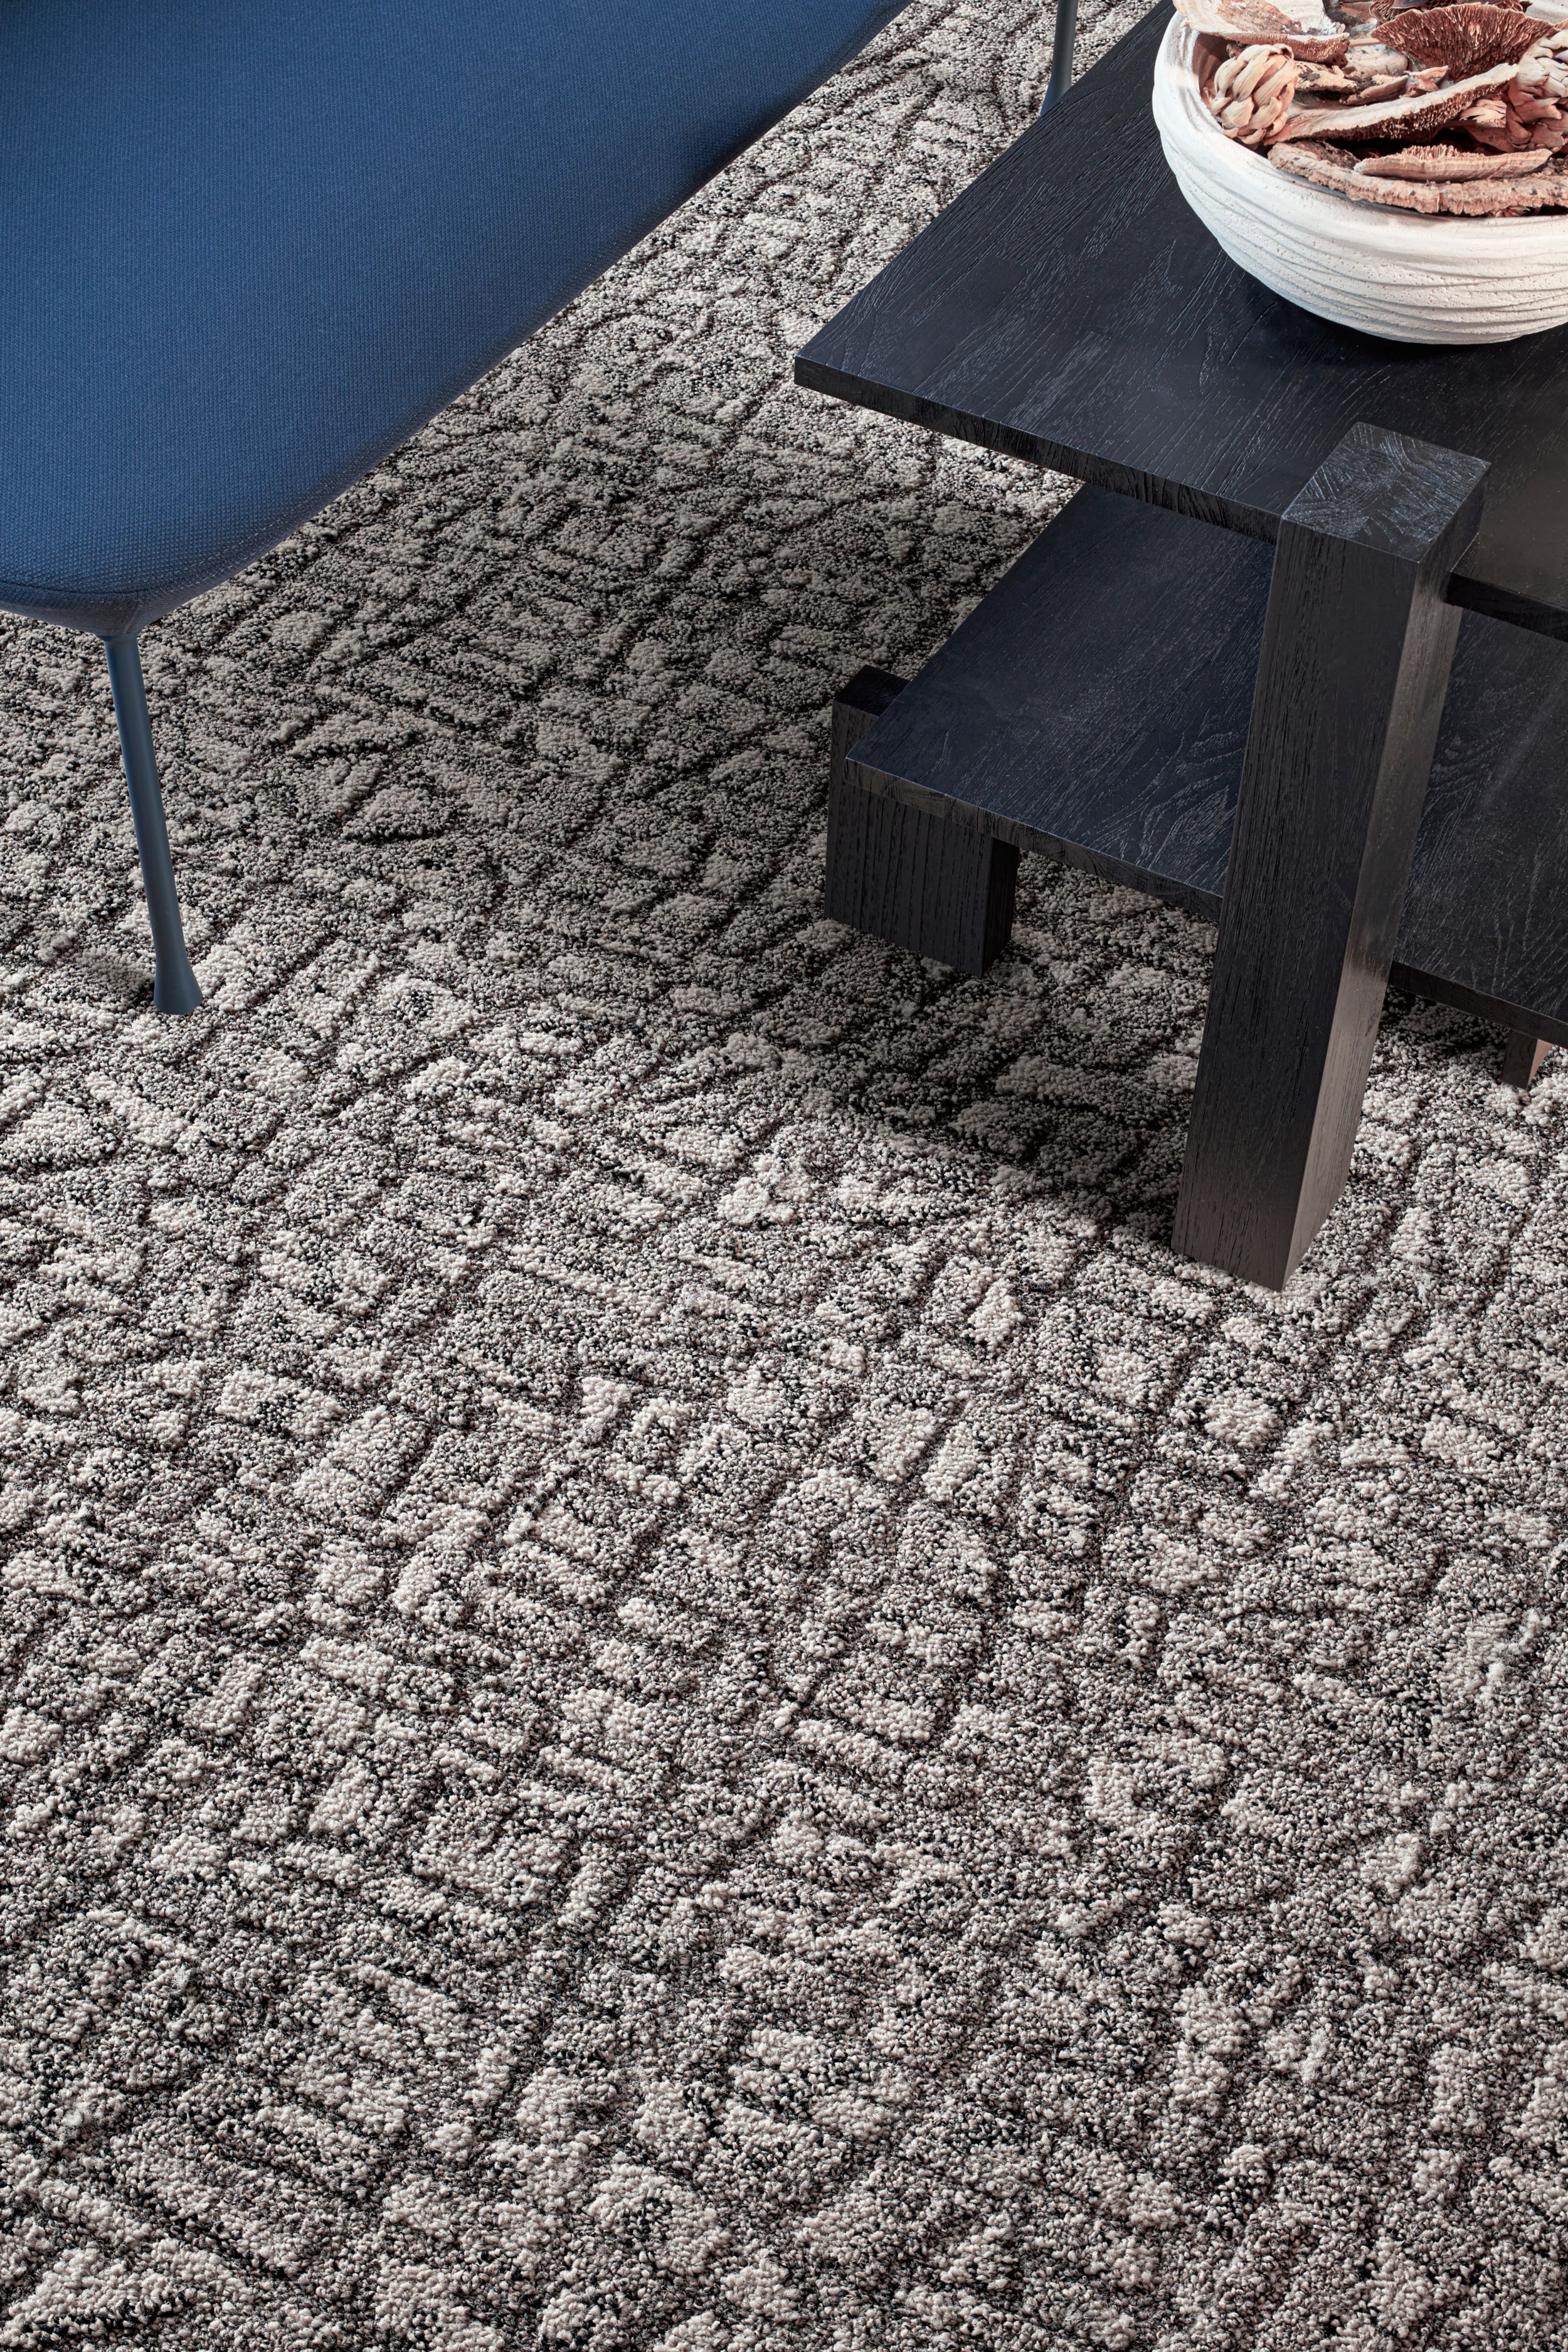 Interface E610 carpet tile in lobby with blue bench and dark wood table imagen número 3